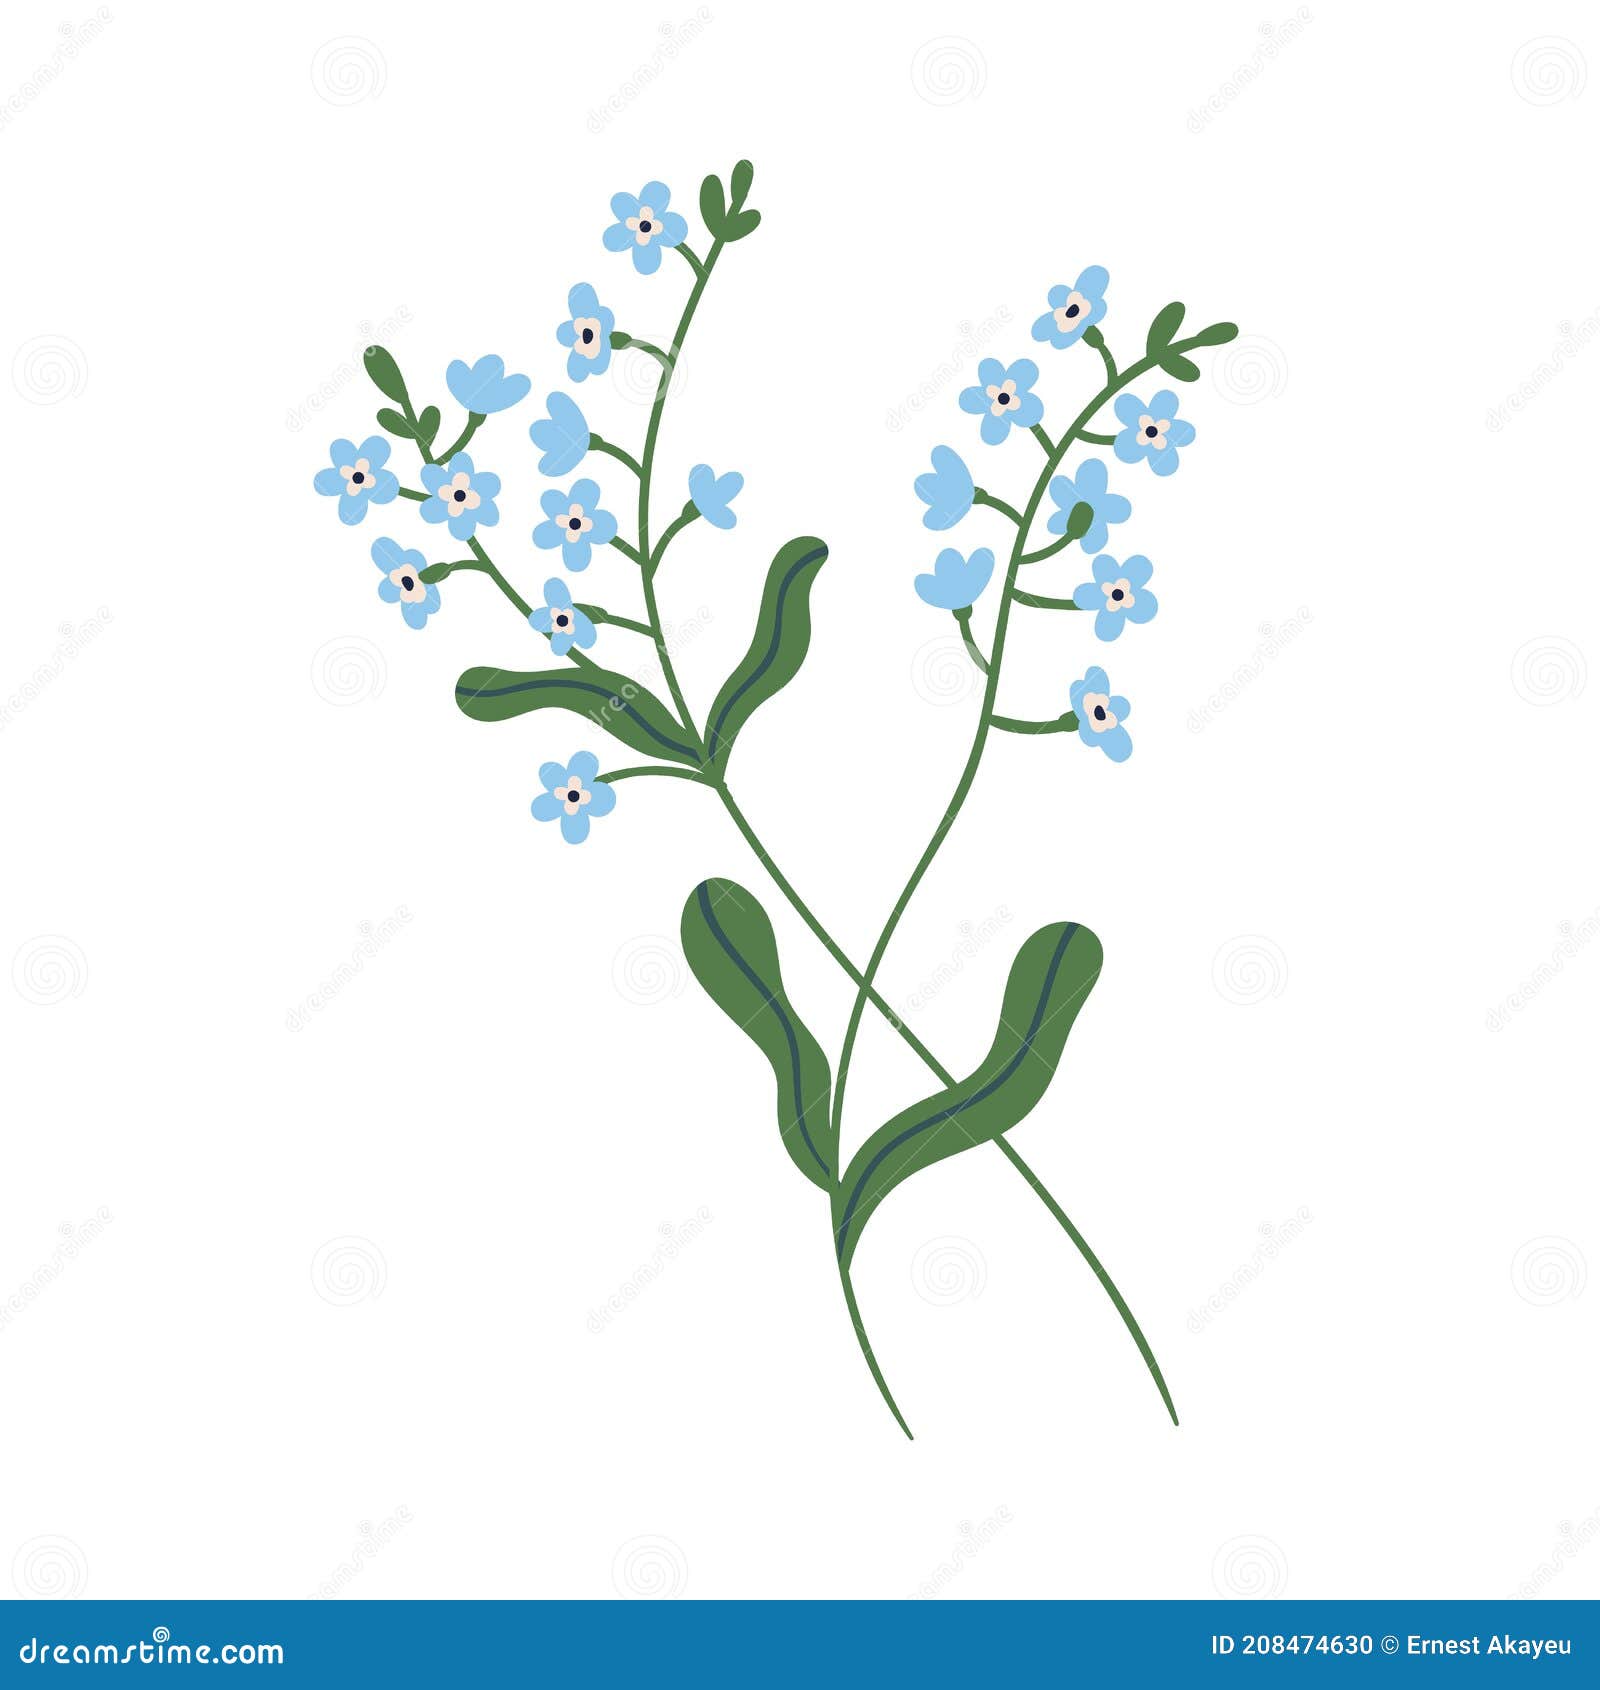 small blue forget-me-not flowers on stem with leaves. delicate blooming forgetmenots. botanical floral . colorful